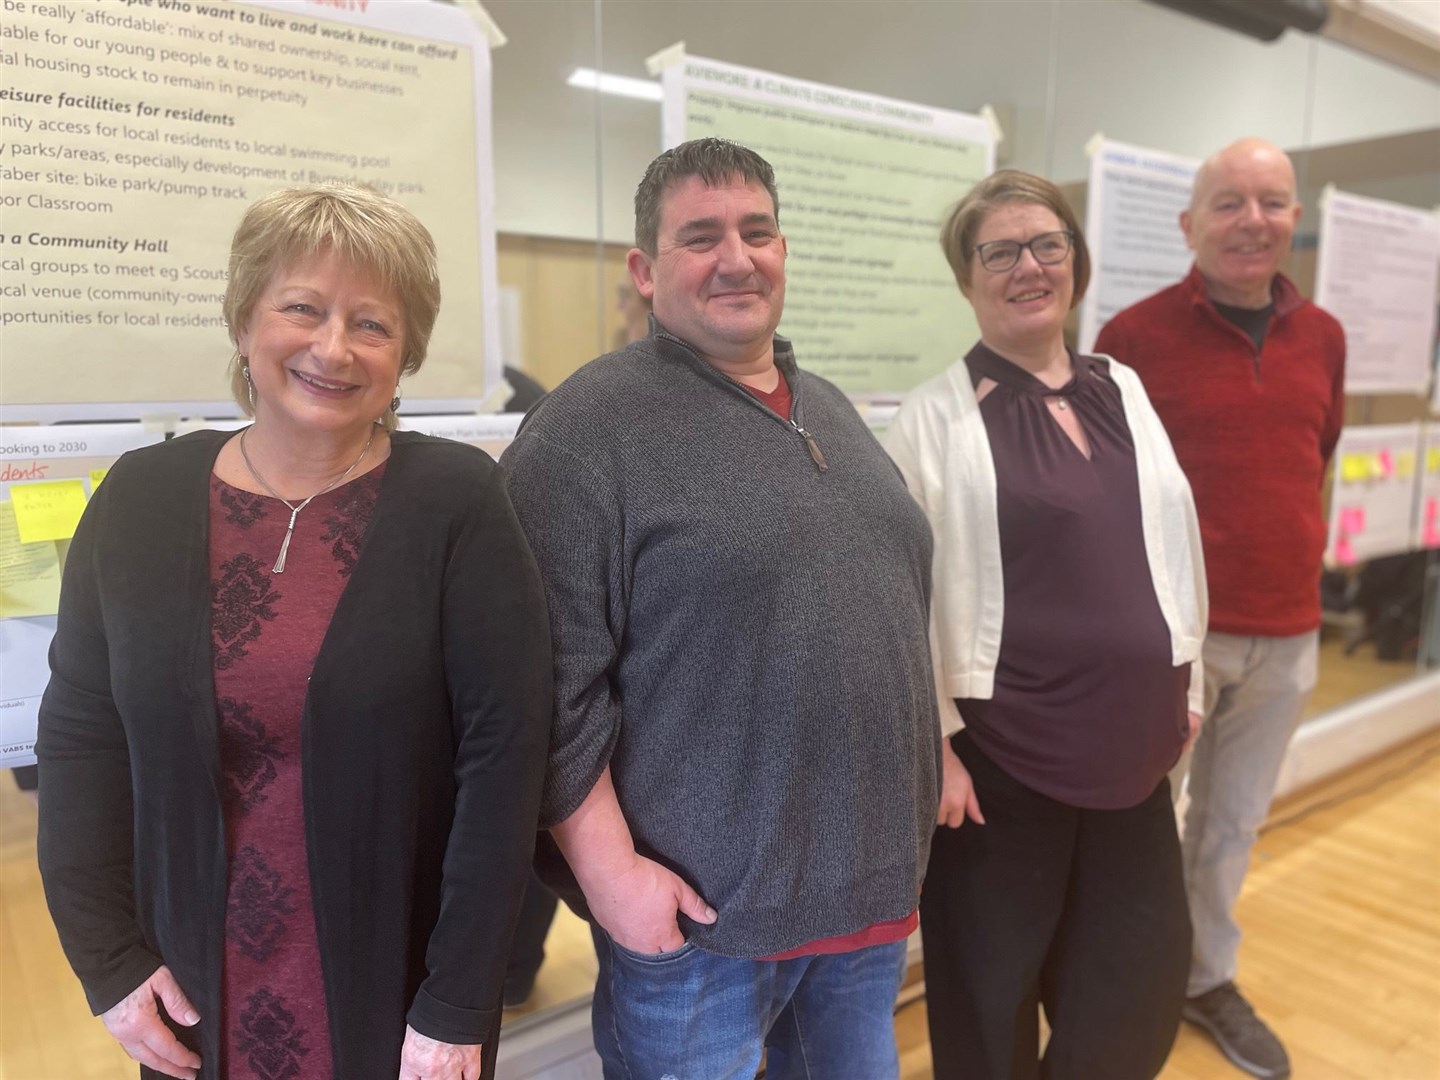 Karen Derrick, Al Dargie, Kathleen Cameron, chair of Aviemore Community Enterprise Ltd and Peter Long, also from the community council and ACE at the Community Action Plan consultation.